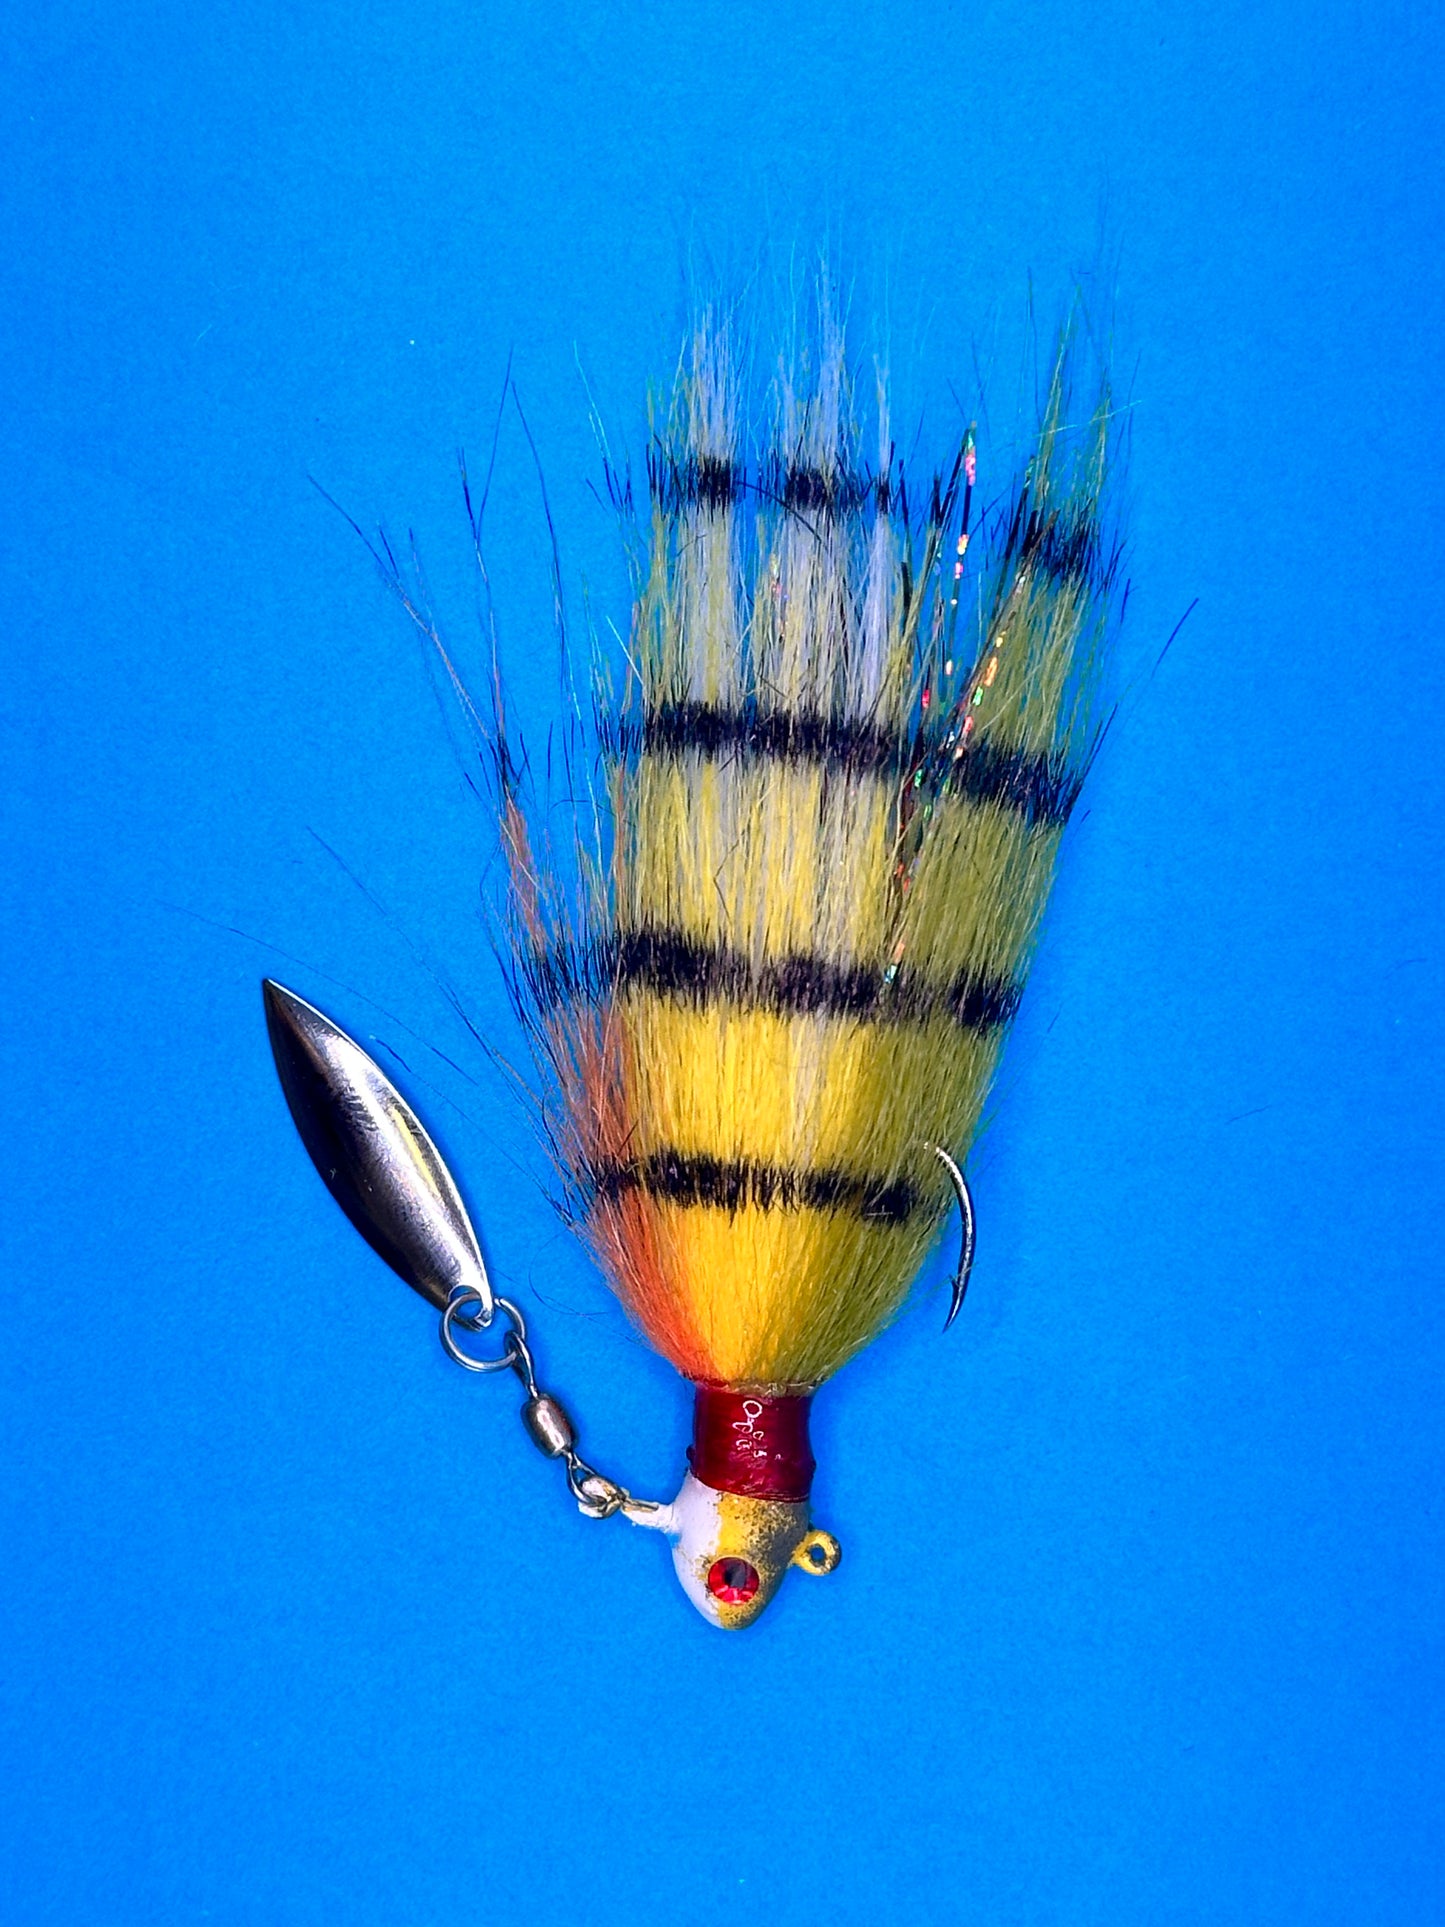 banana underspin 1/16thoztrout